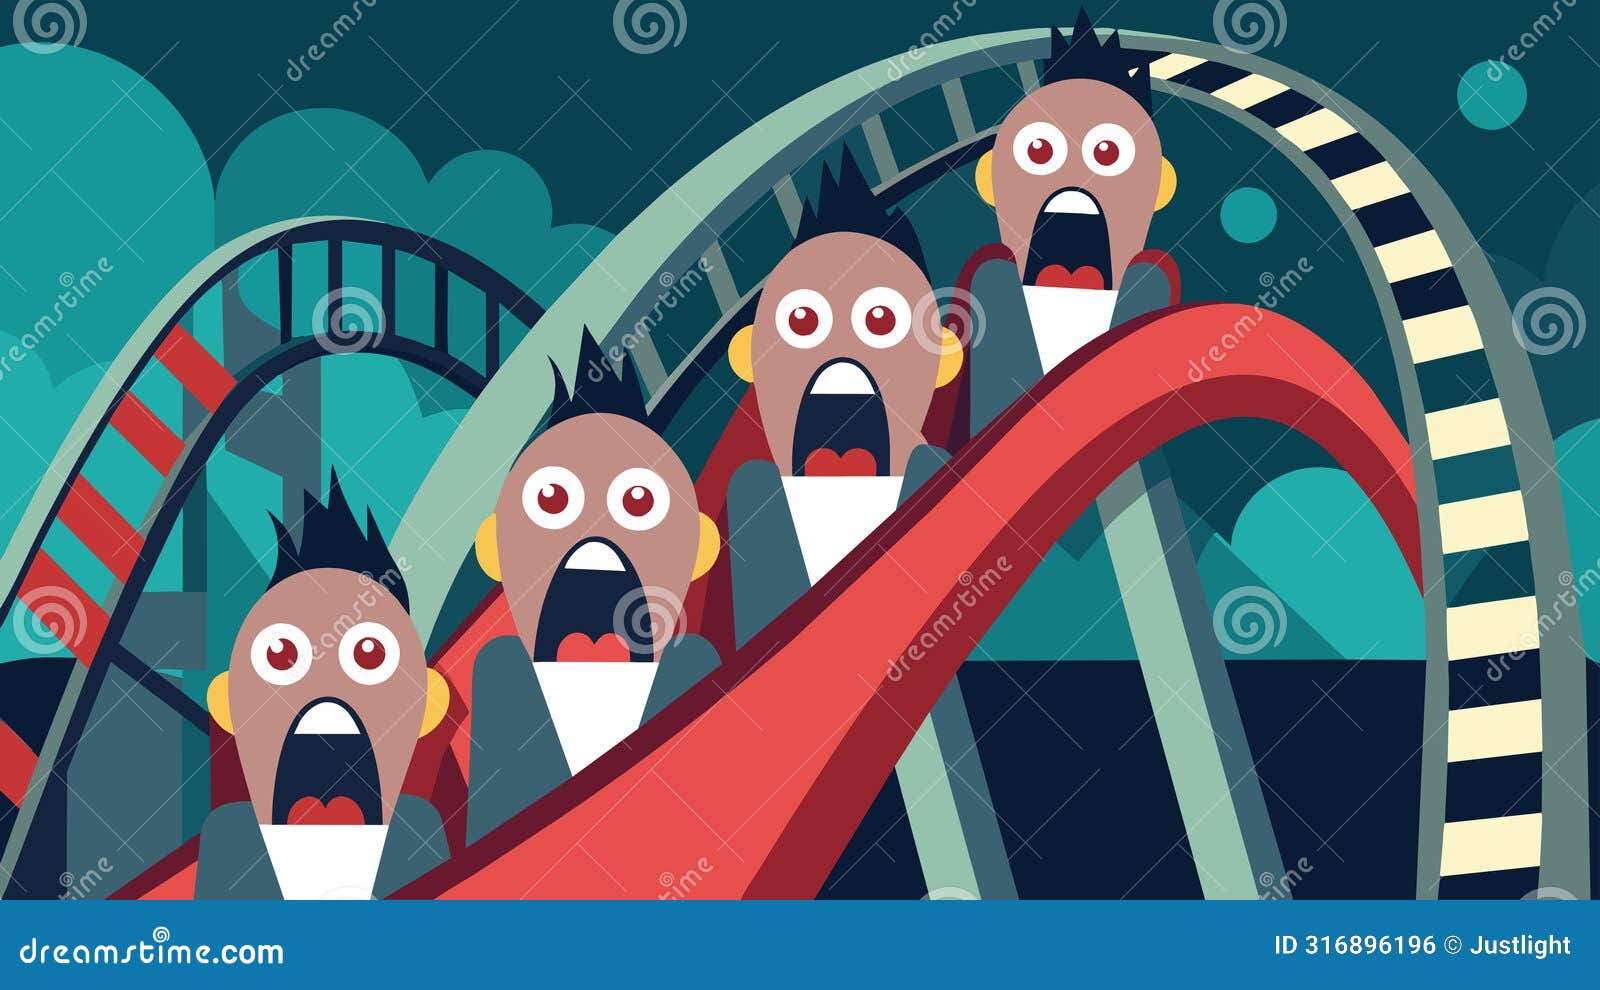 the paranoia coaster riders are sped into a roller coaster that plays on their deepest fears and insecurities causing